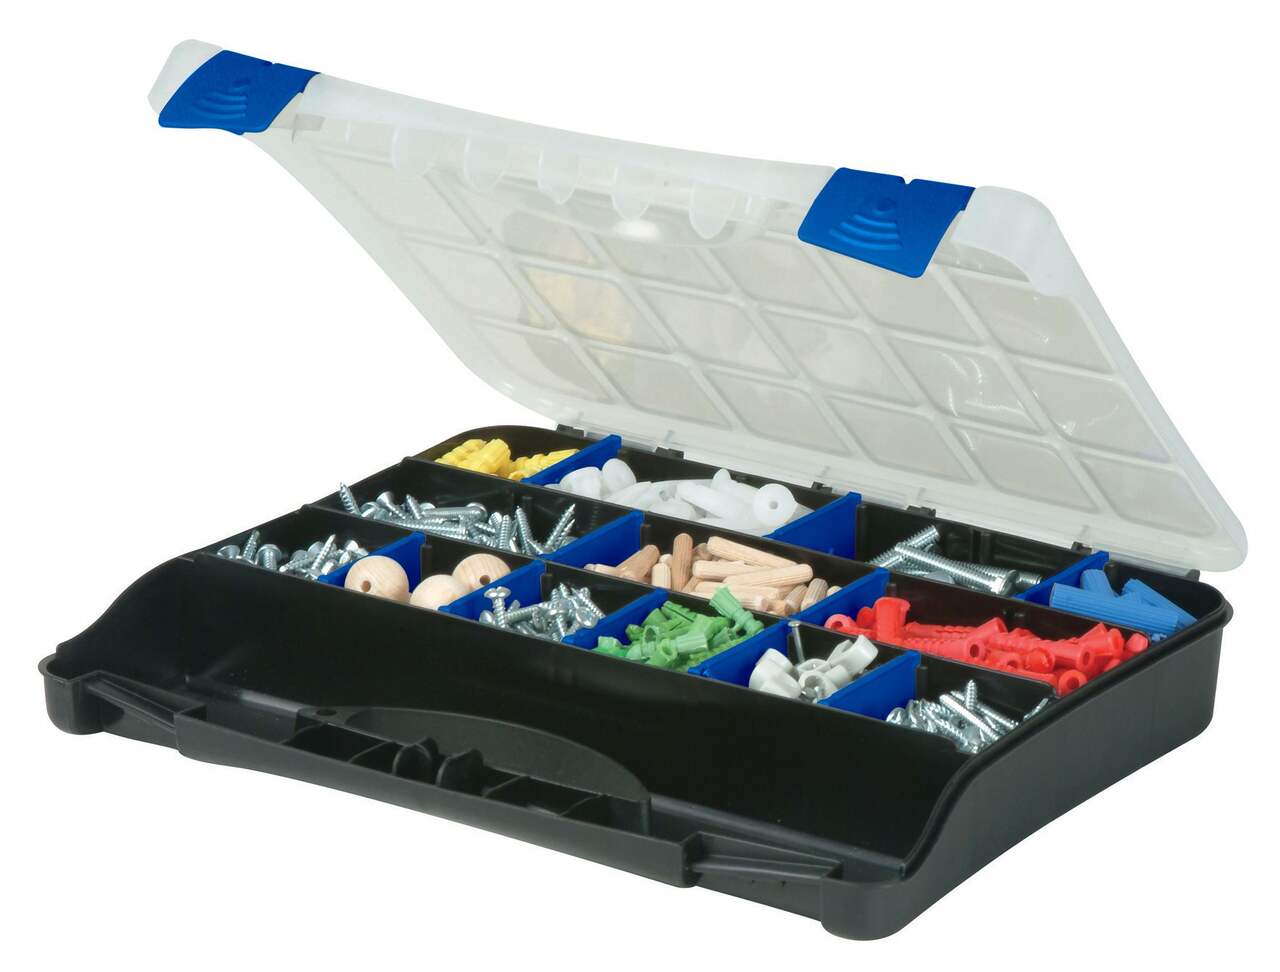 https://media-www.canadiantire.ca/product/fixing/tools/tool-storage/0581045/mastercraft-parts-organizer-c94ac745-951a-4188-aa2d-b6fa09c5e0dc-jpgrendition.jpg?imdensity=1&imwidth=1244&impolicy=mZoom